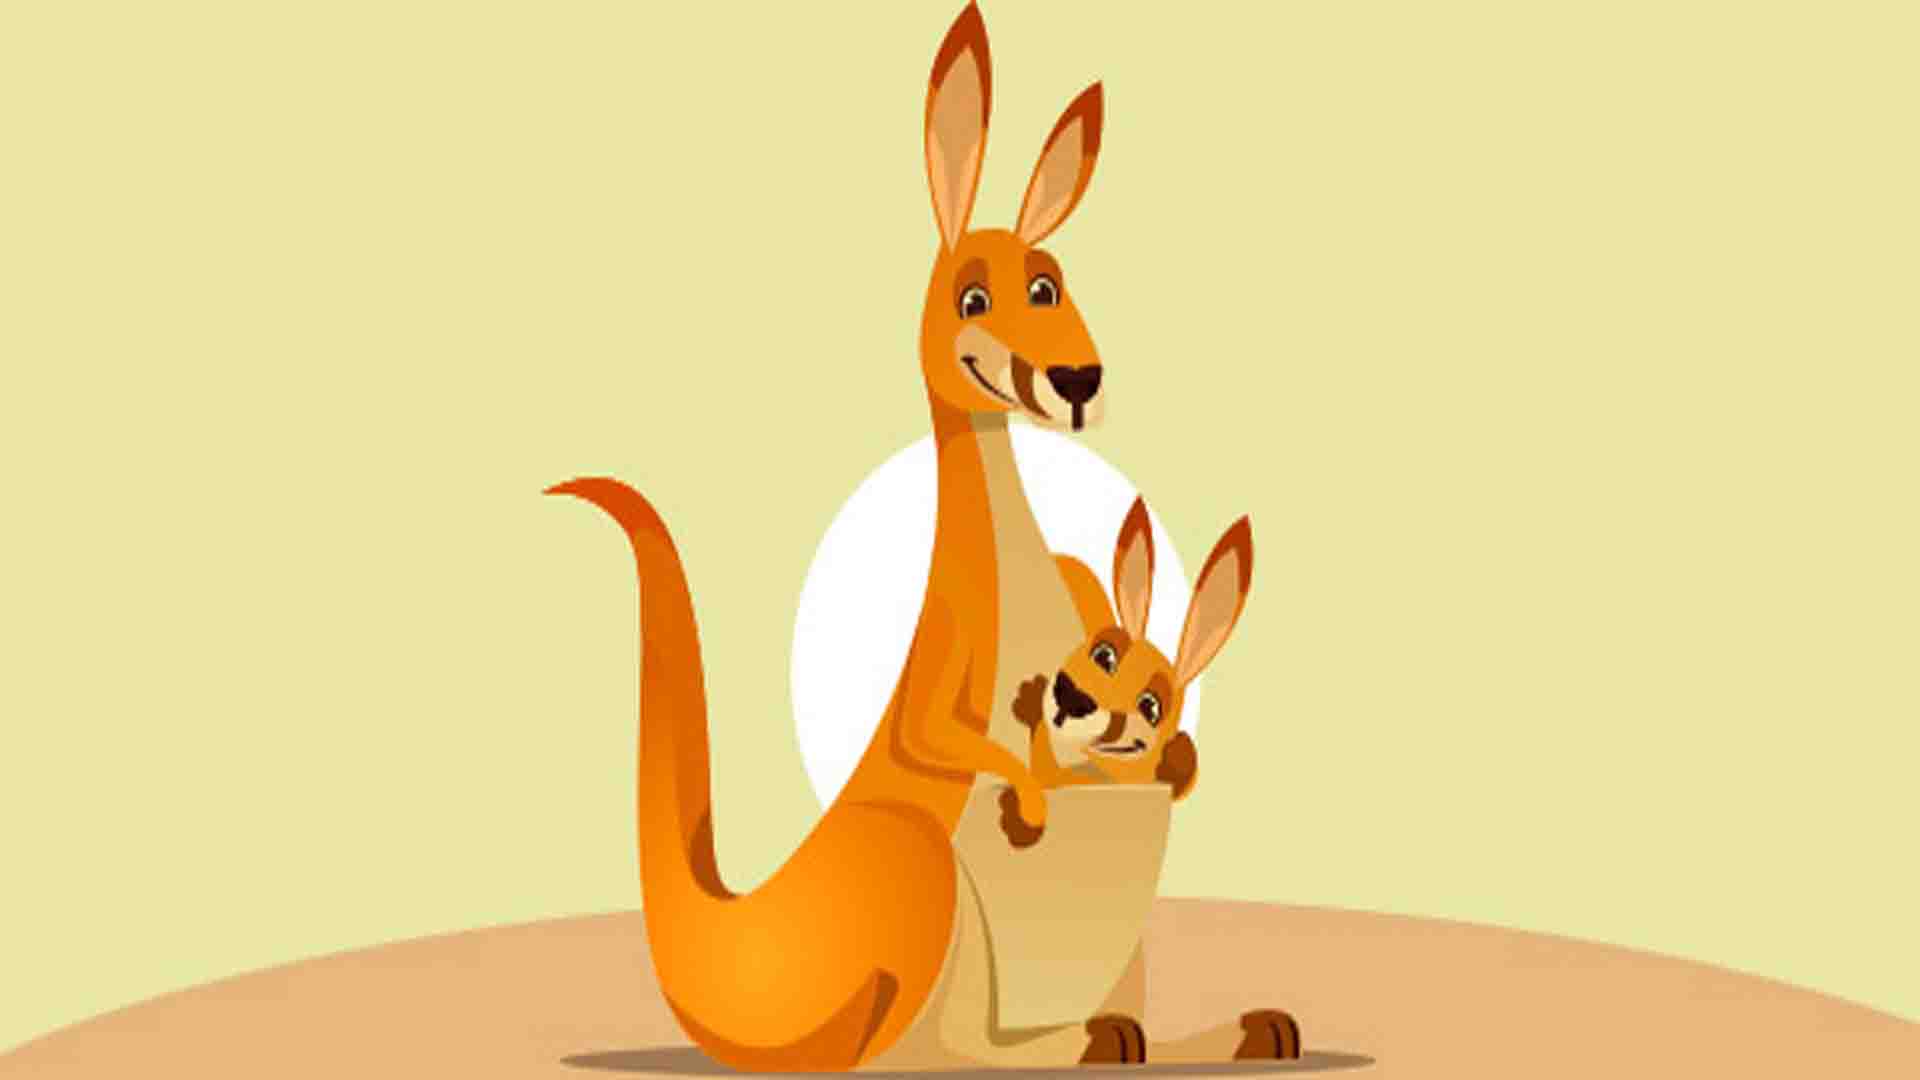 The legend of the kangaroo a short stories for kids